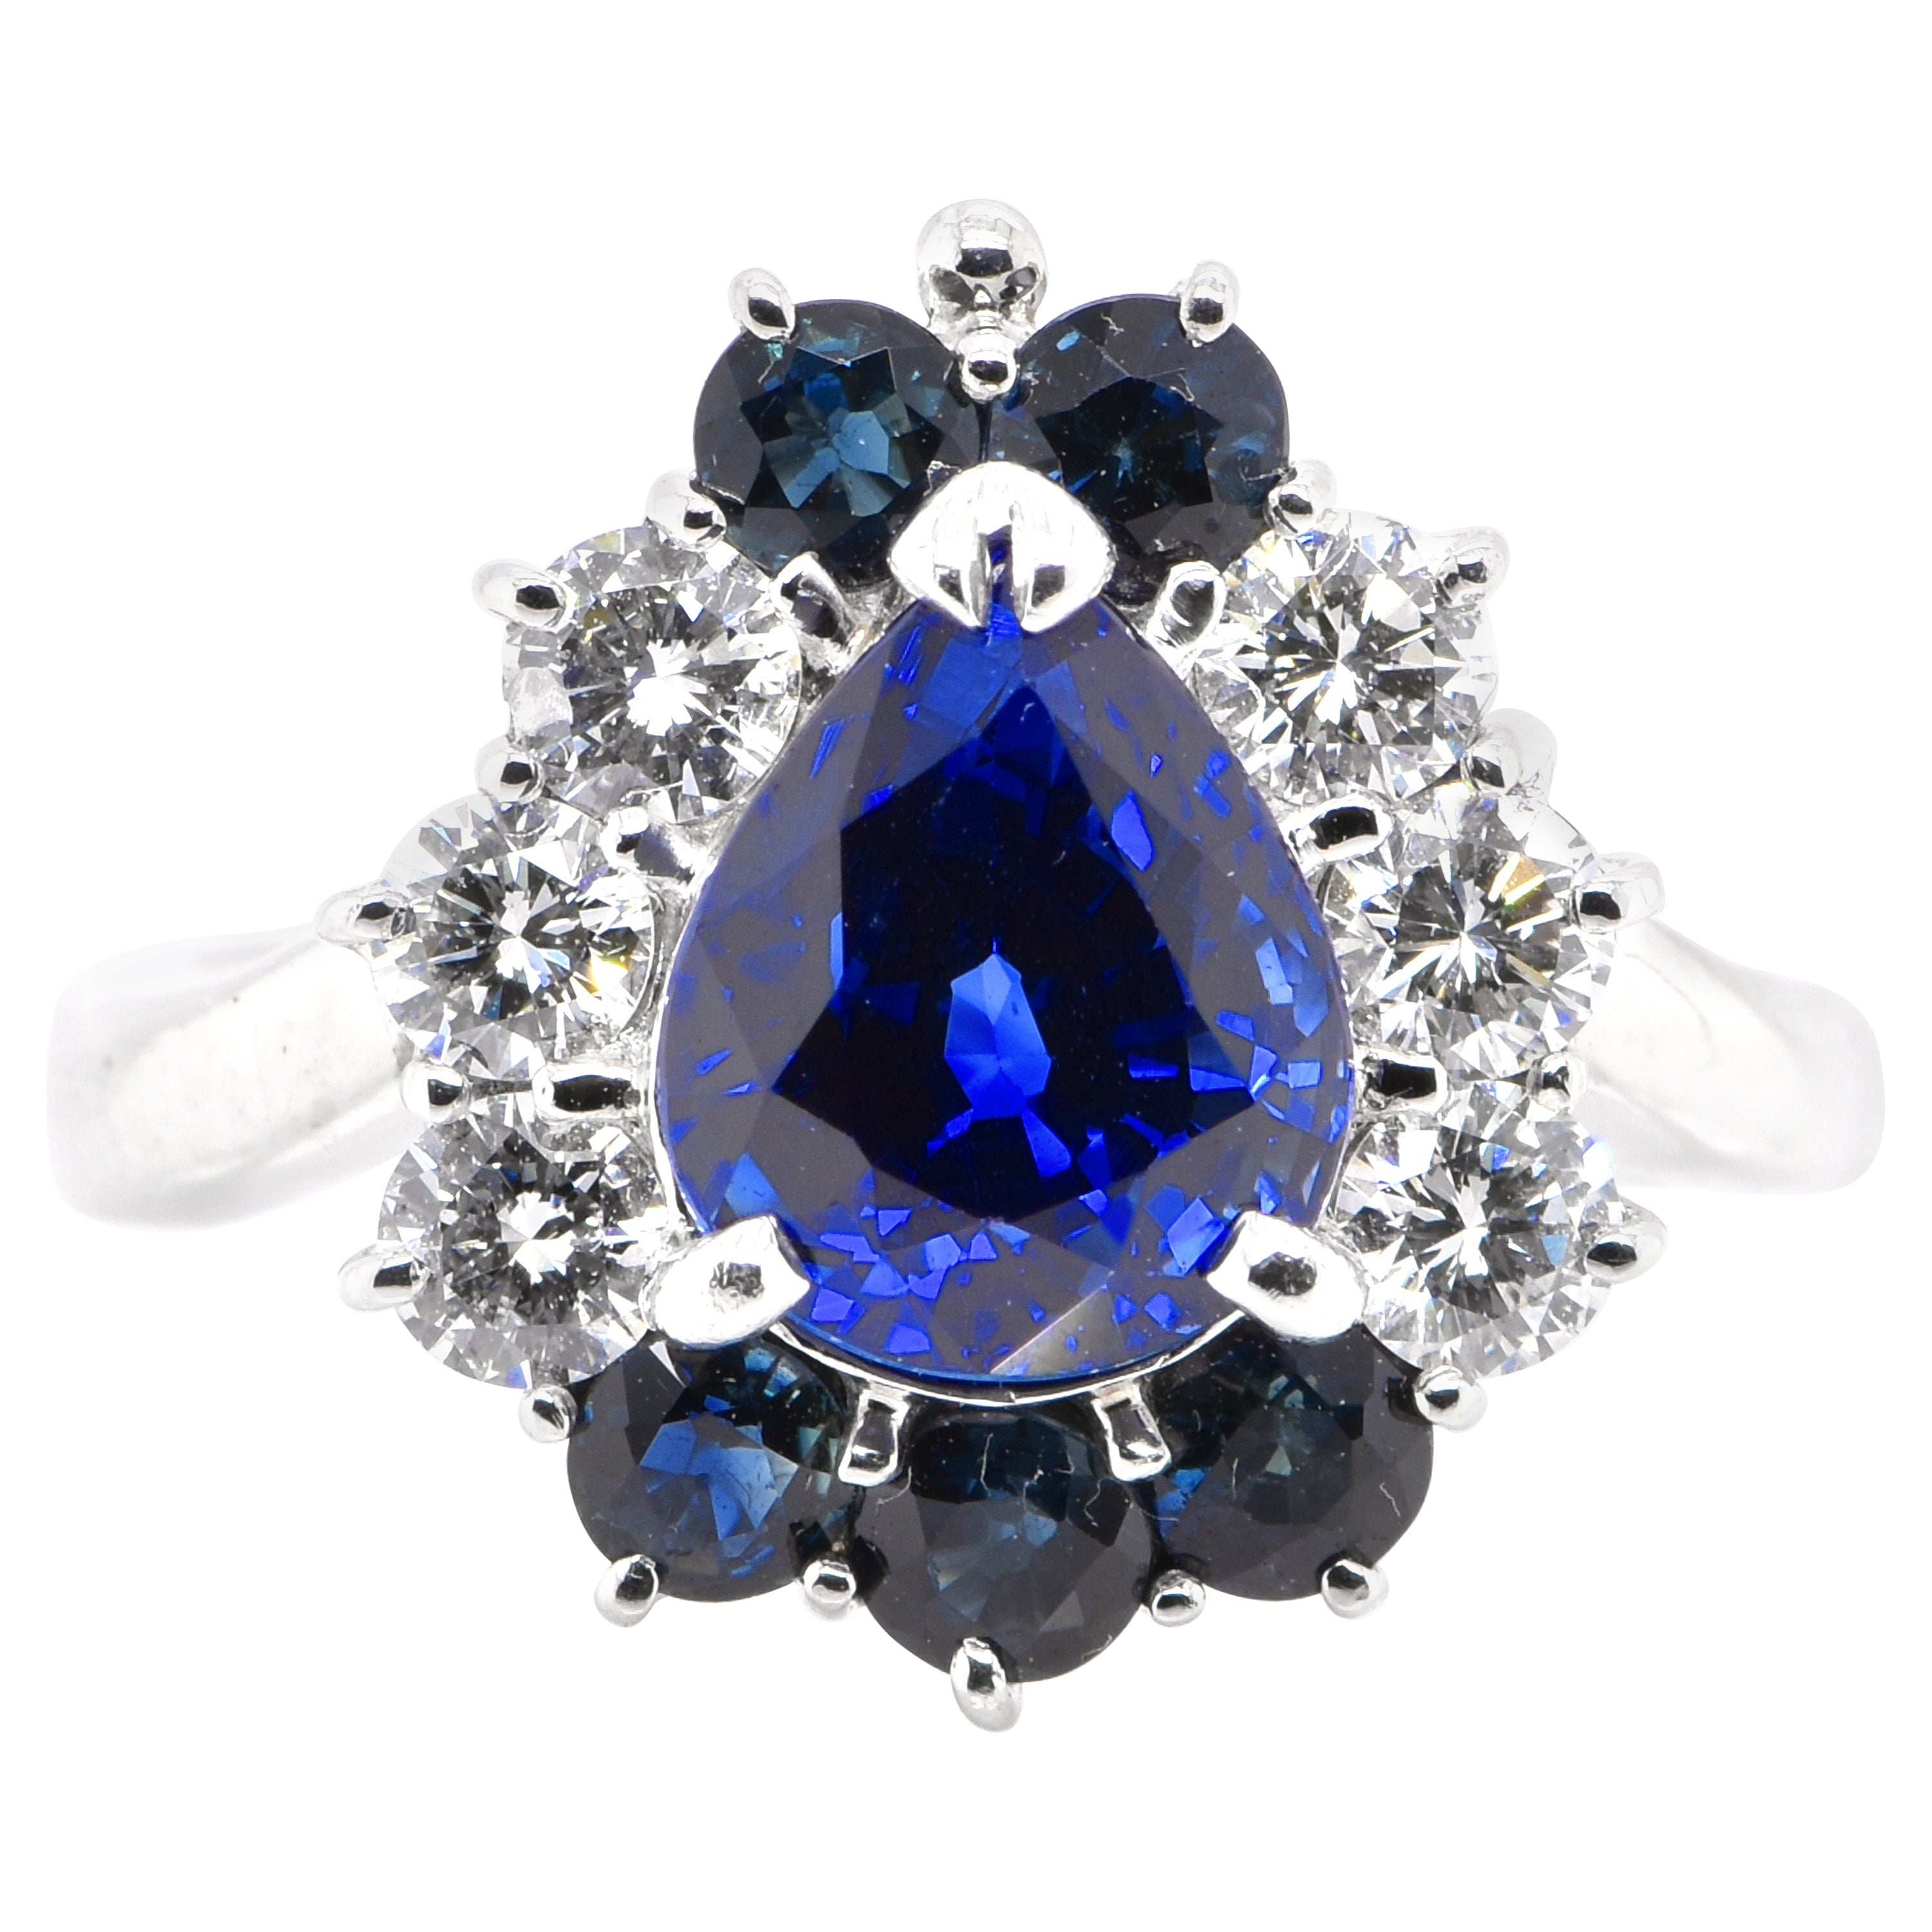 3.49 Carat Natural Blue Sapphire and Diamond Halo Ring Set in Platinum